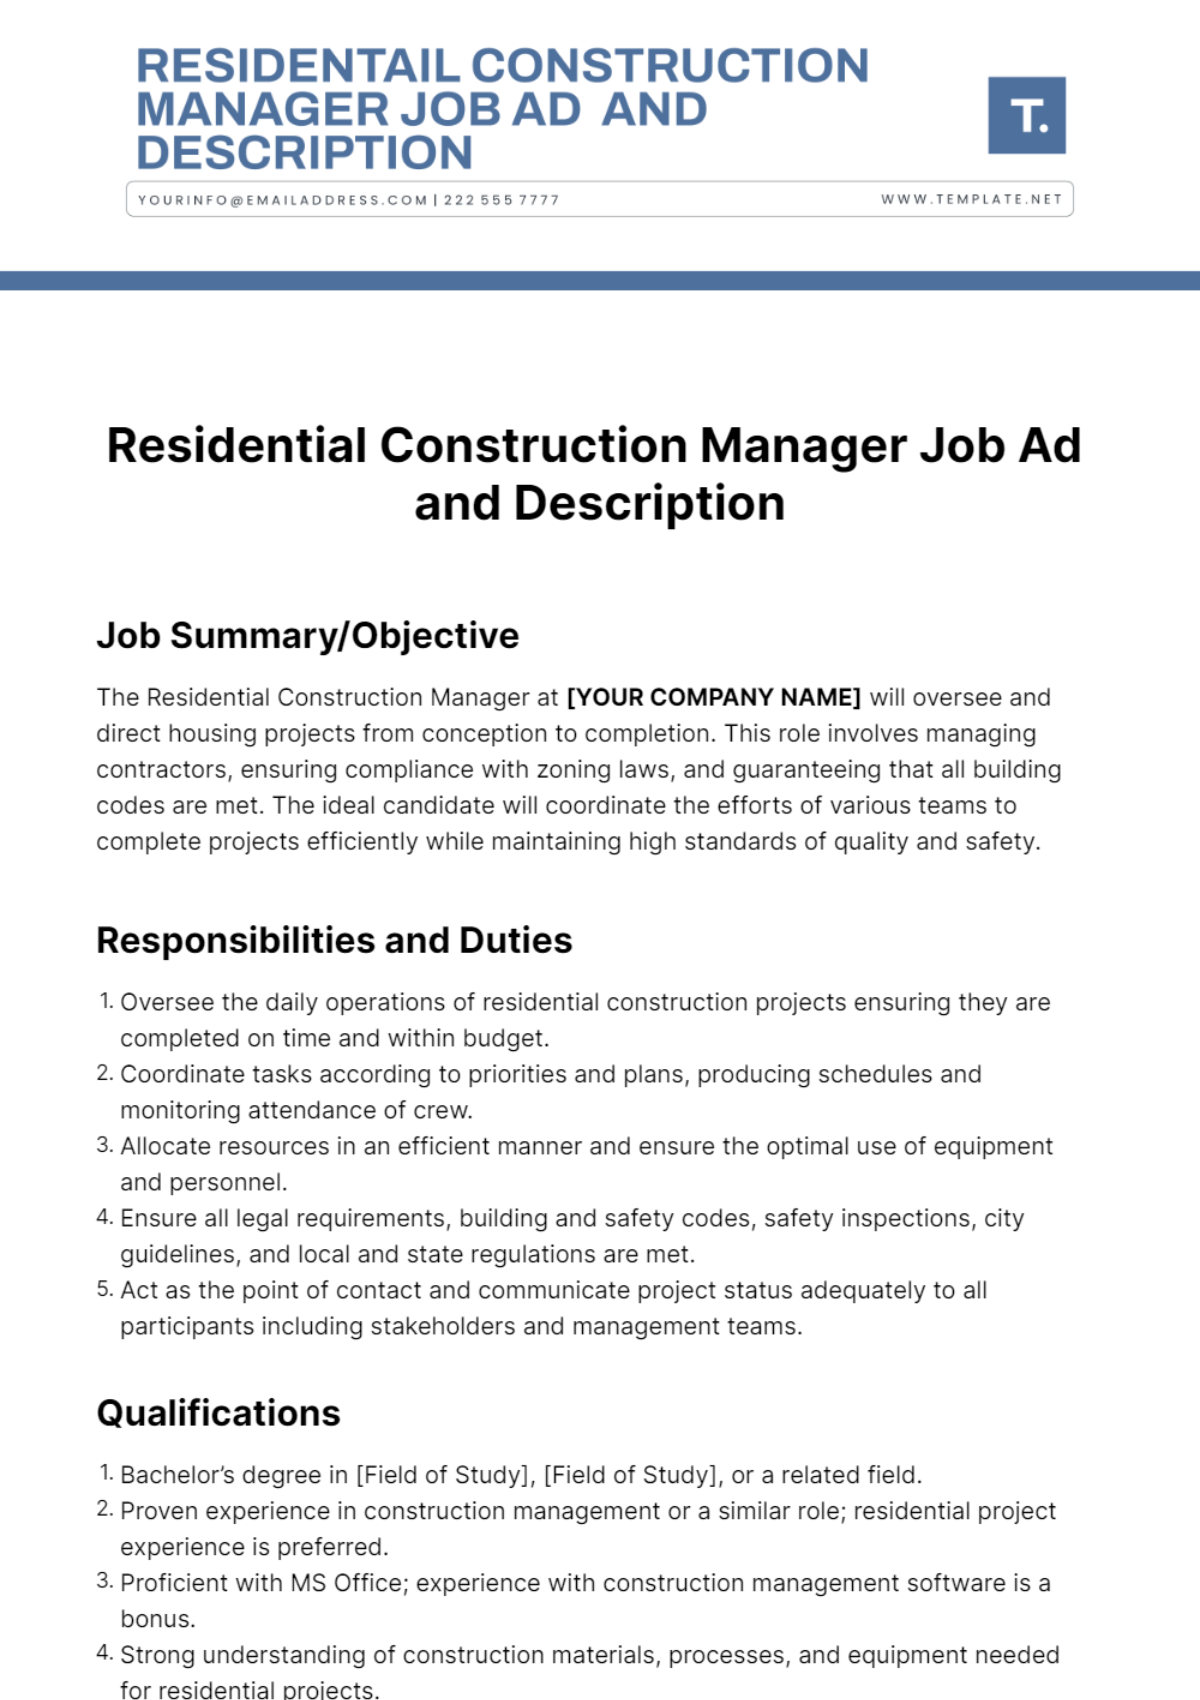 Residential Construction Manager Job Ad and Description Template